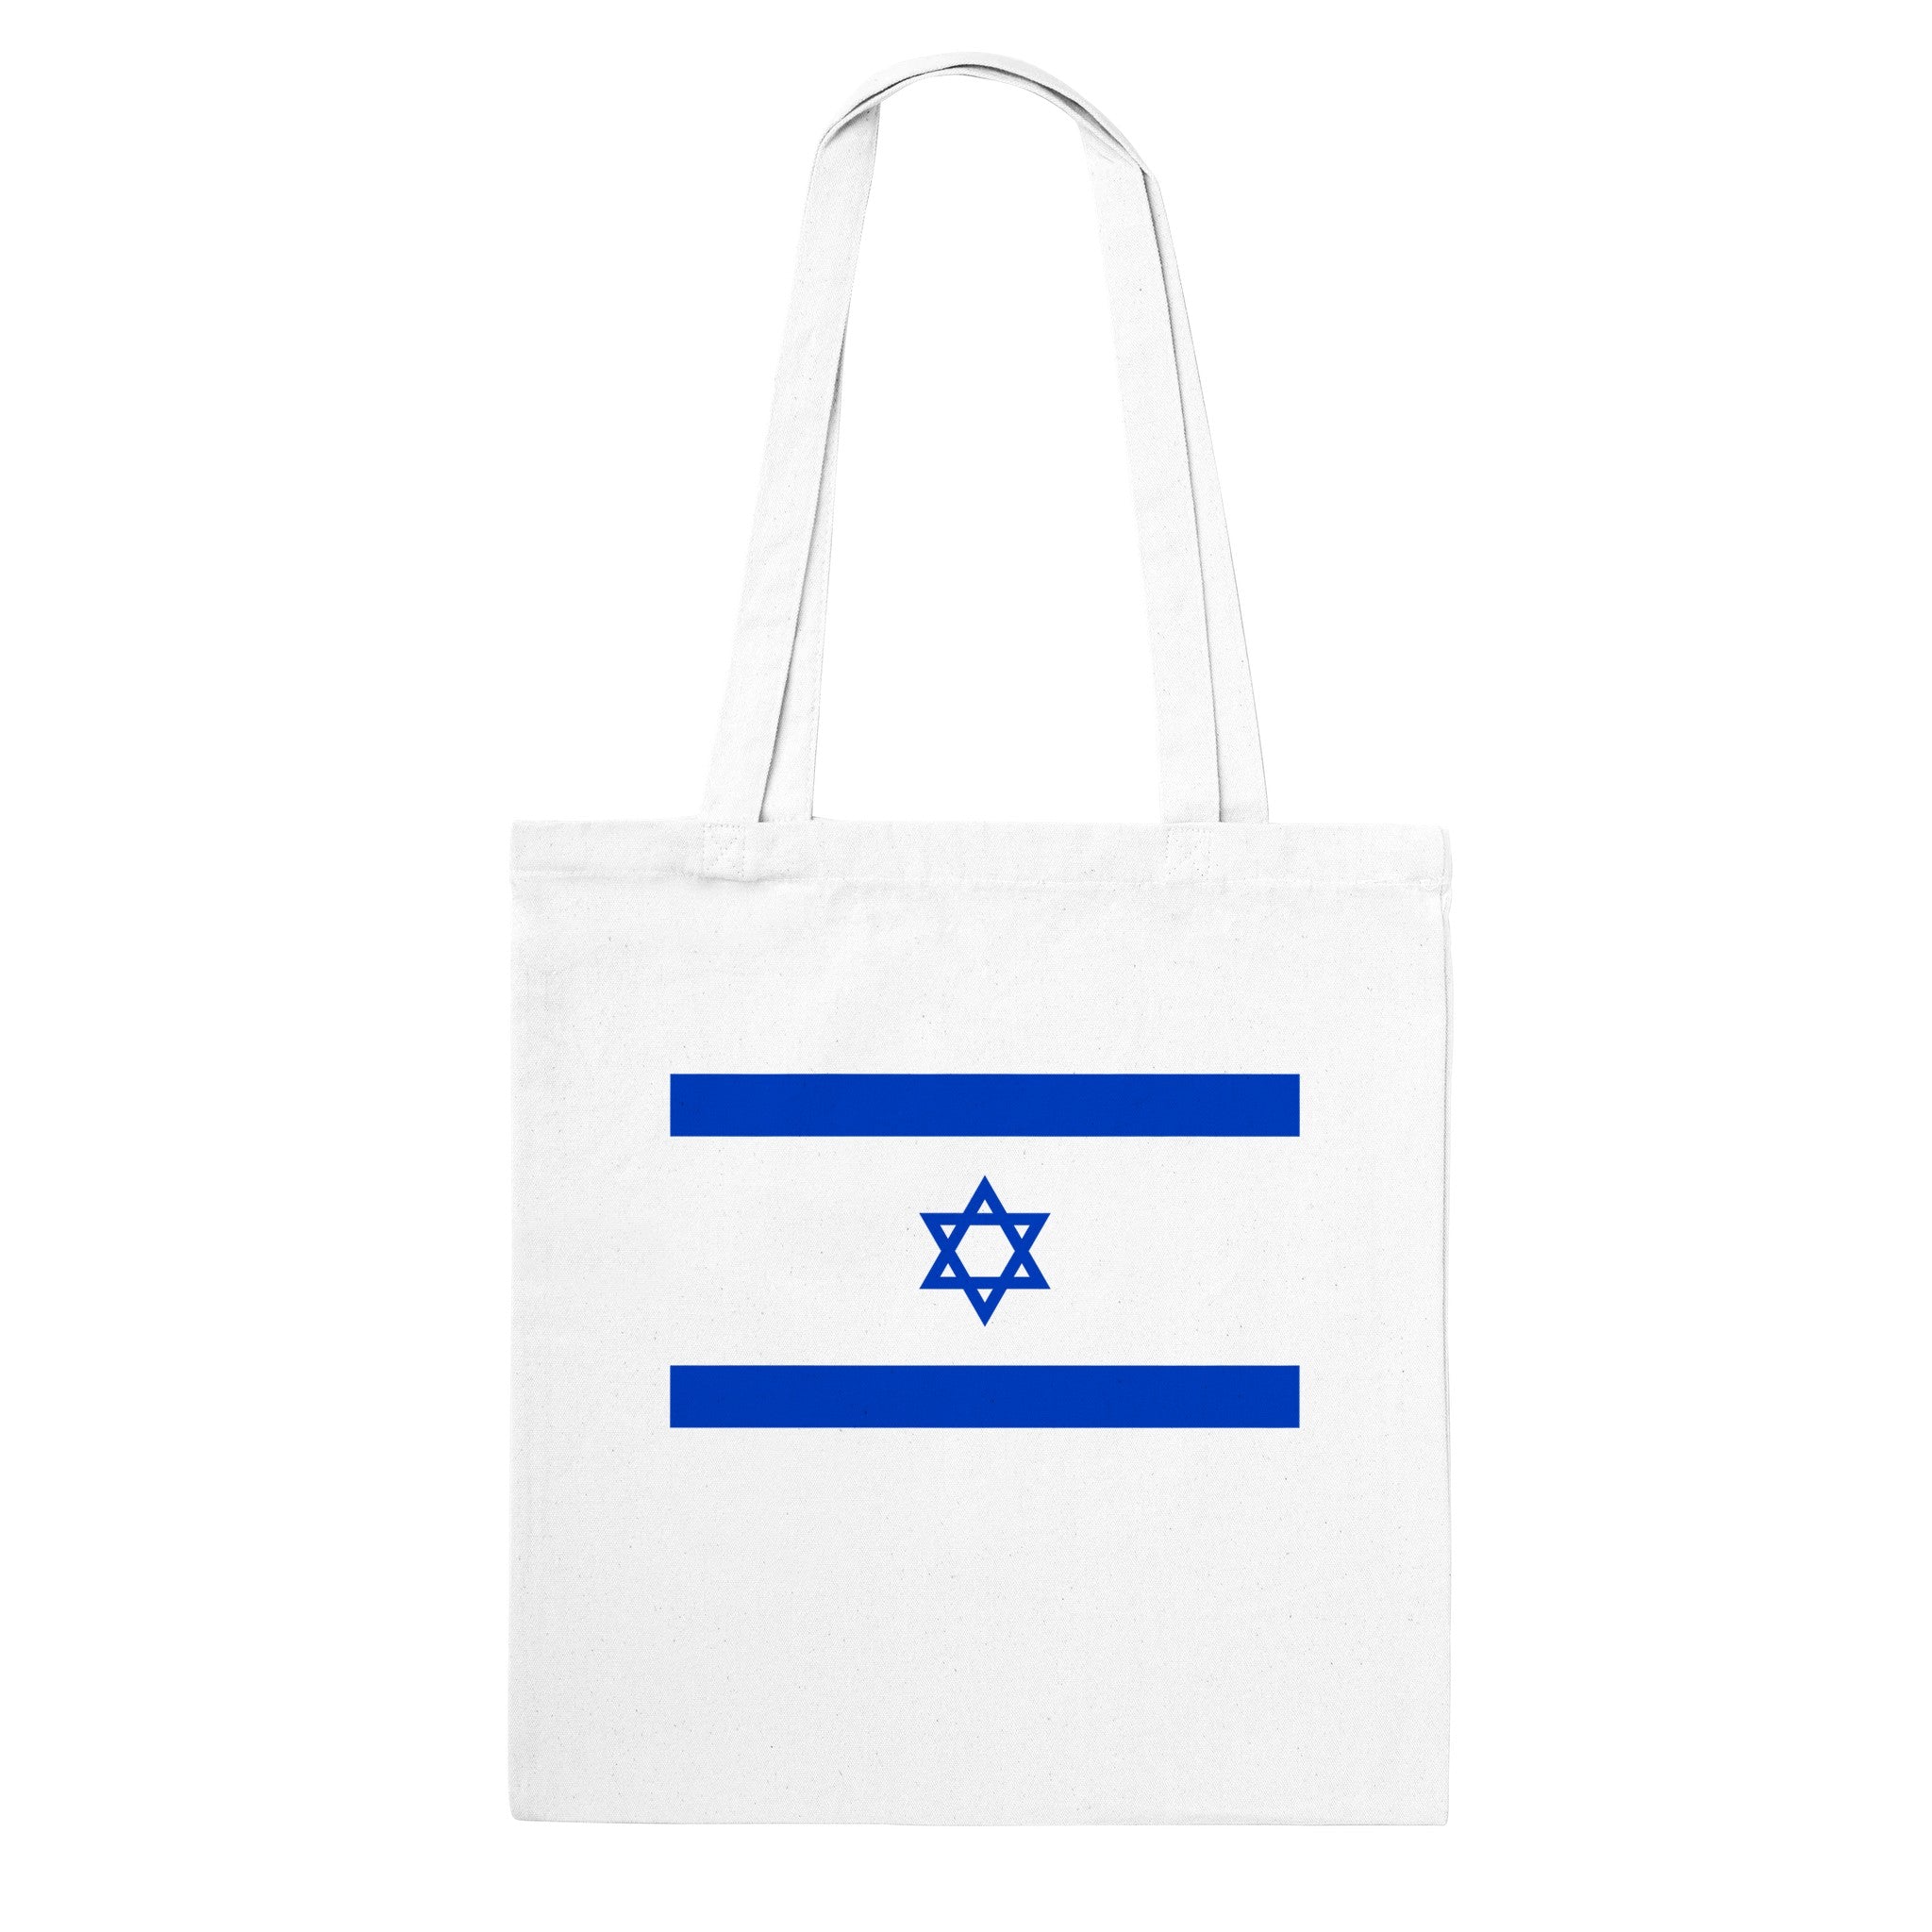 Am Yisrael Chai (I Stan d with Israel) Bags sold by MocelyKoycel | SKU  86793118 | 65% OFF Printerval